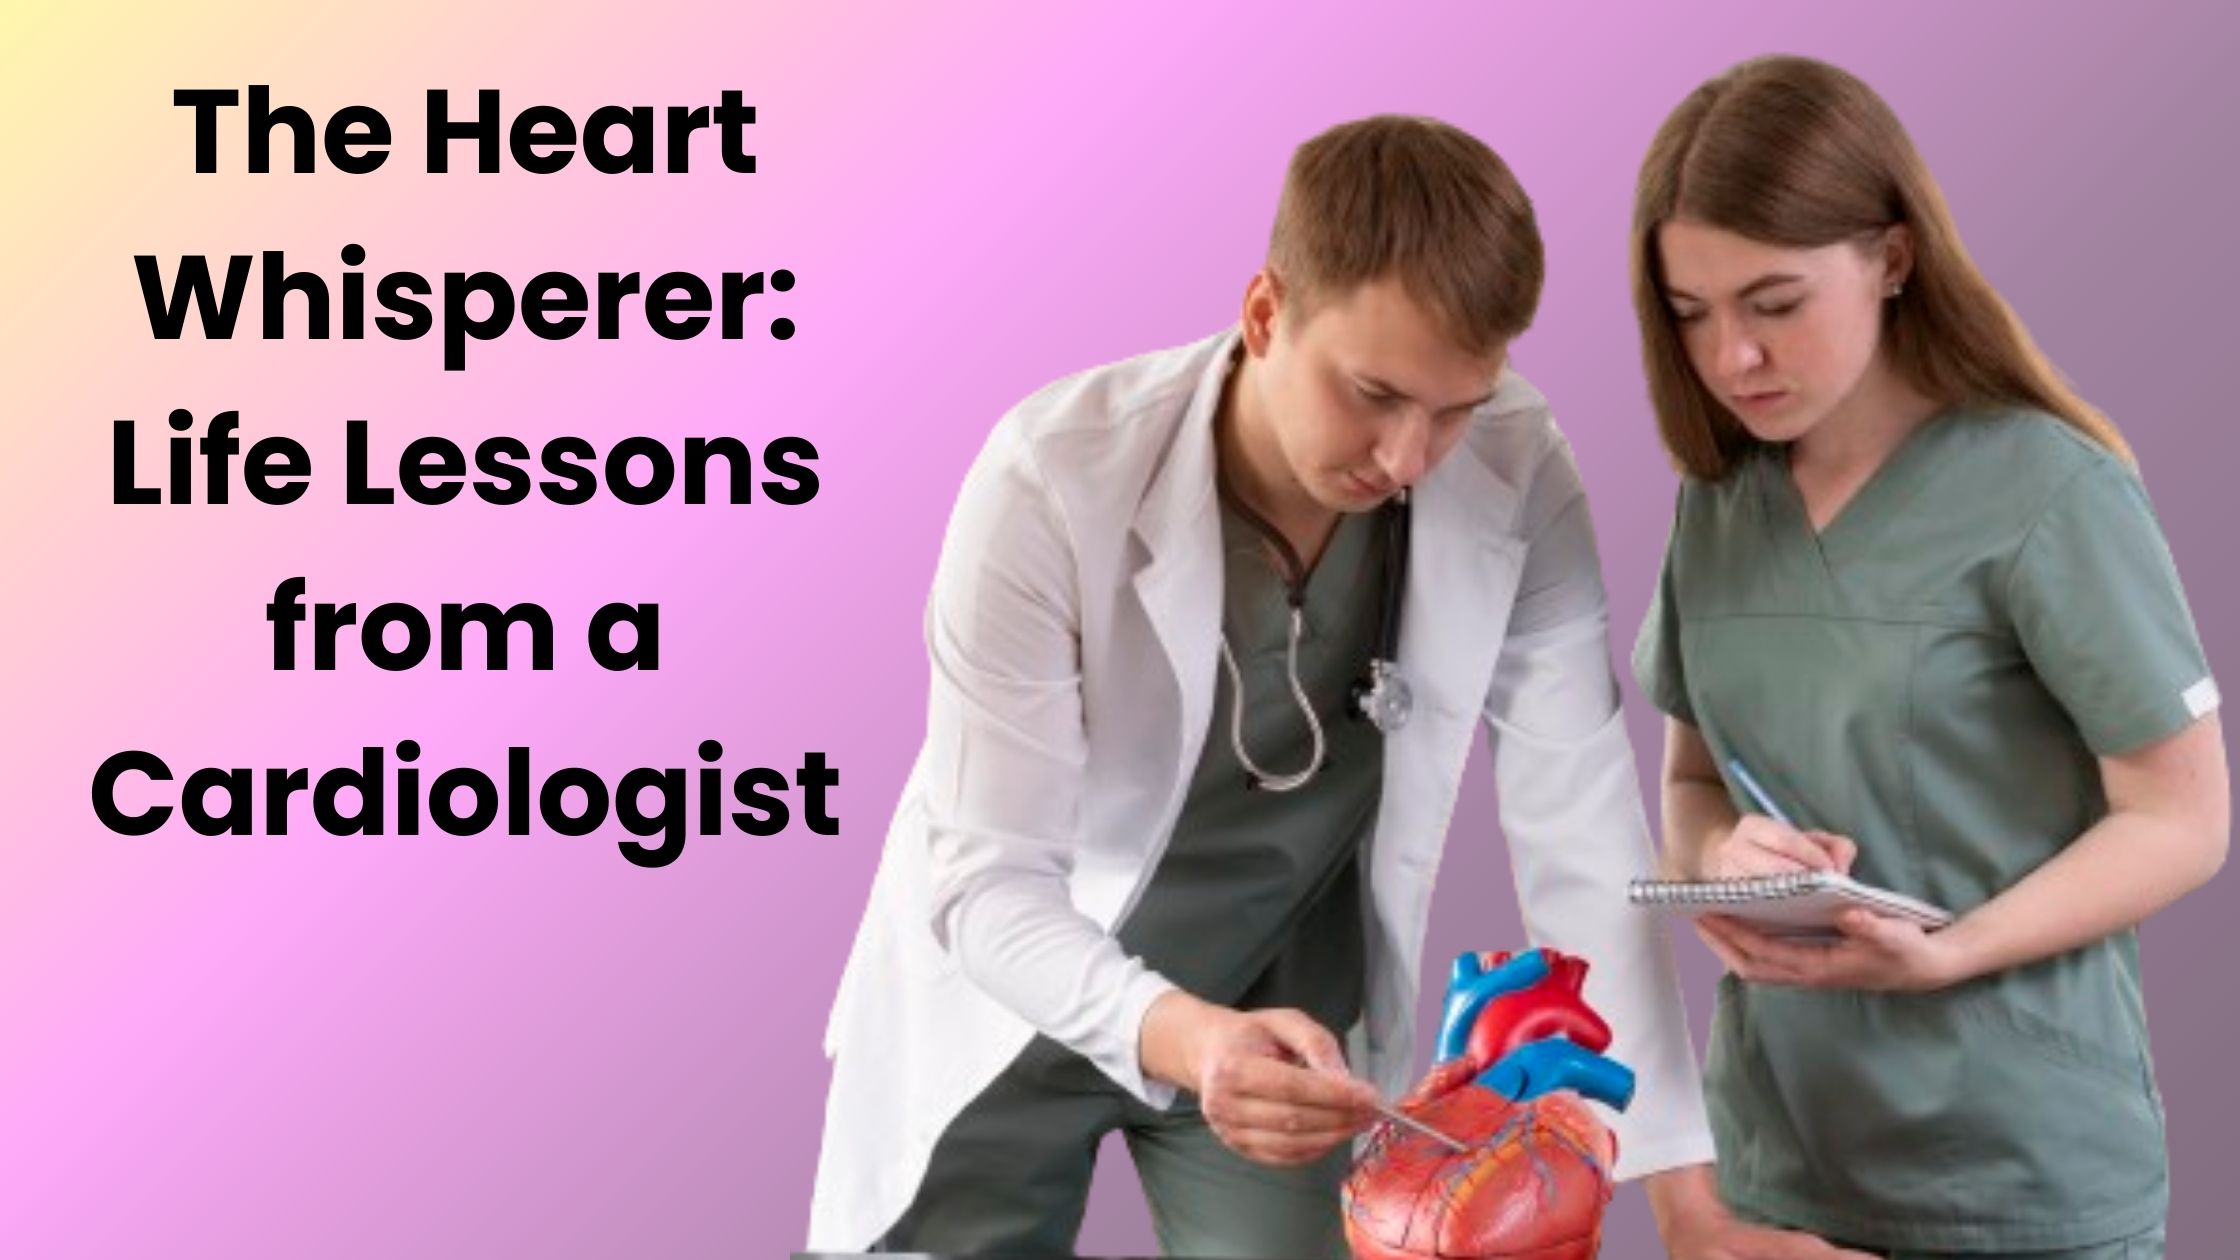 The Heart Whisperer: Life Lessons from a Cardiologist